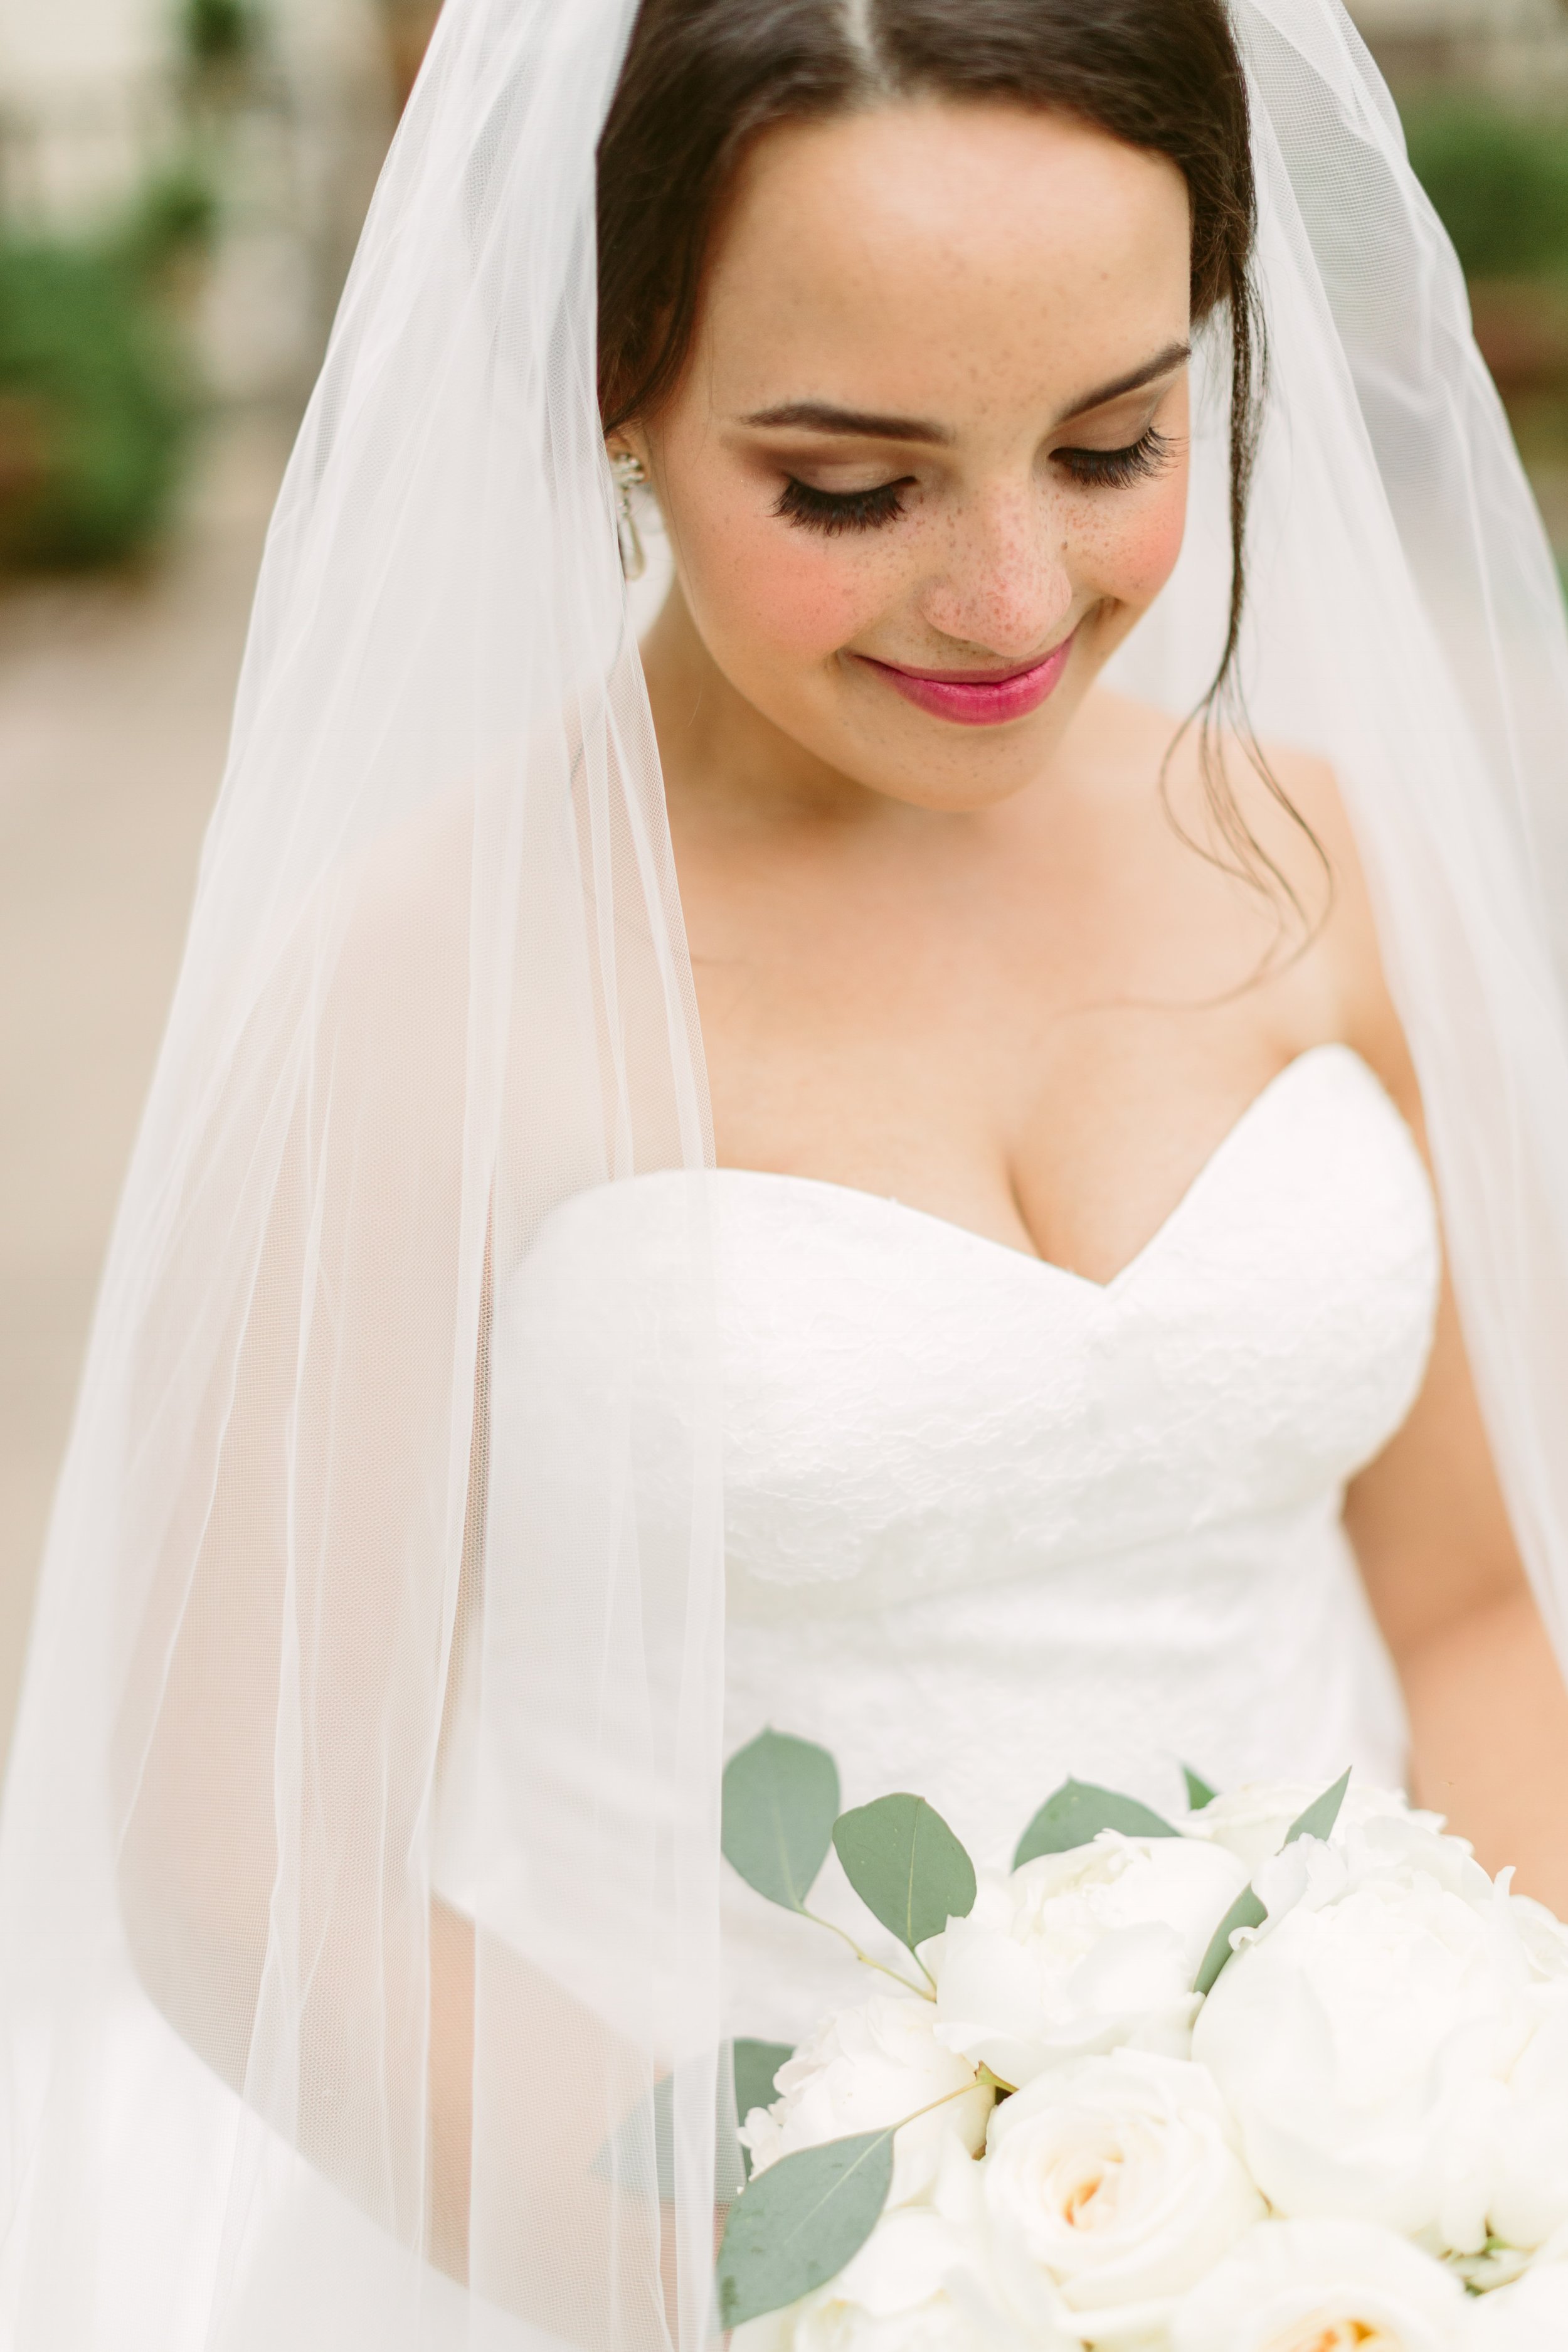 Professional Hair and Makeup for your Central Arkansas wedding Day